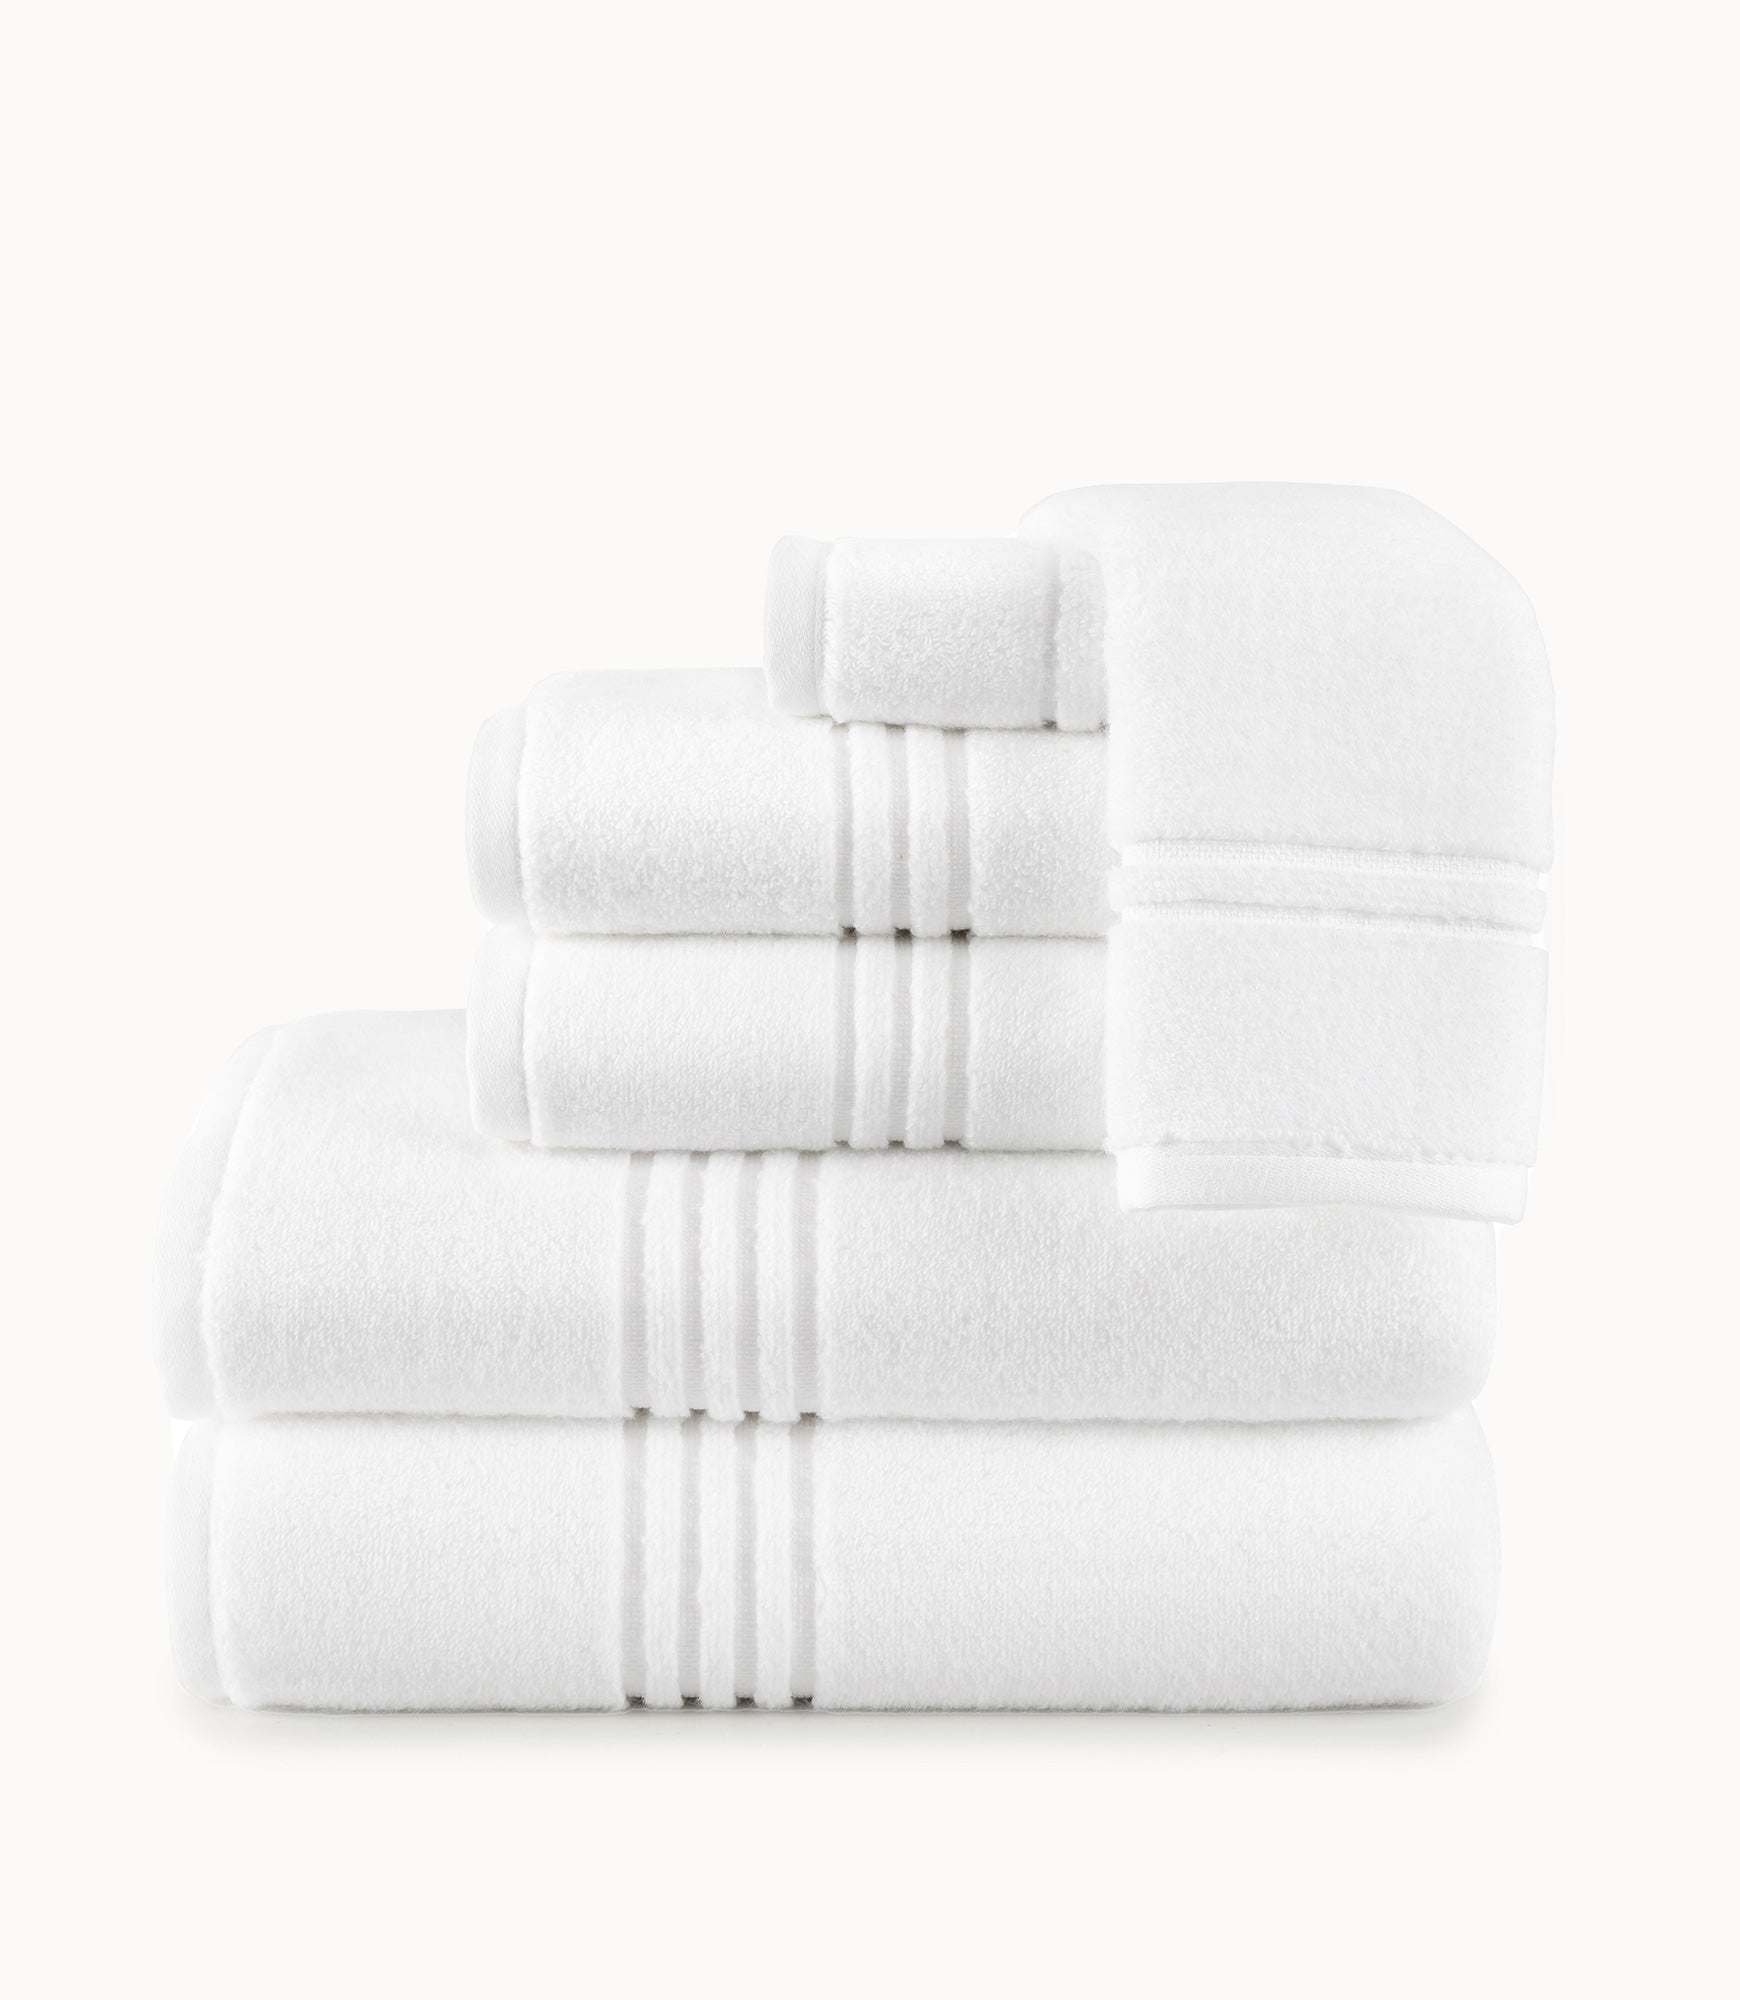 Classic Turkish Towel, Extra Large, Premium Cotton Bath,Thick and  Absorbent,Quick-Dry,Ribbed, Luxury Bathroom